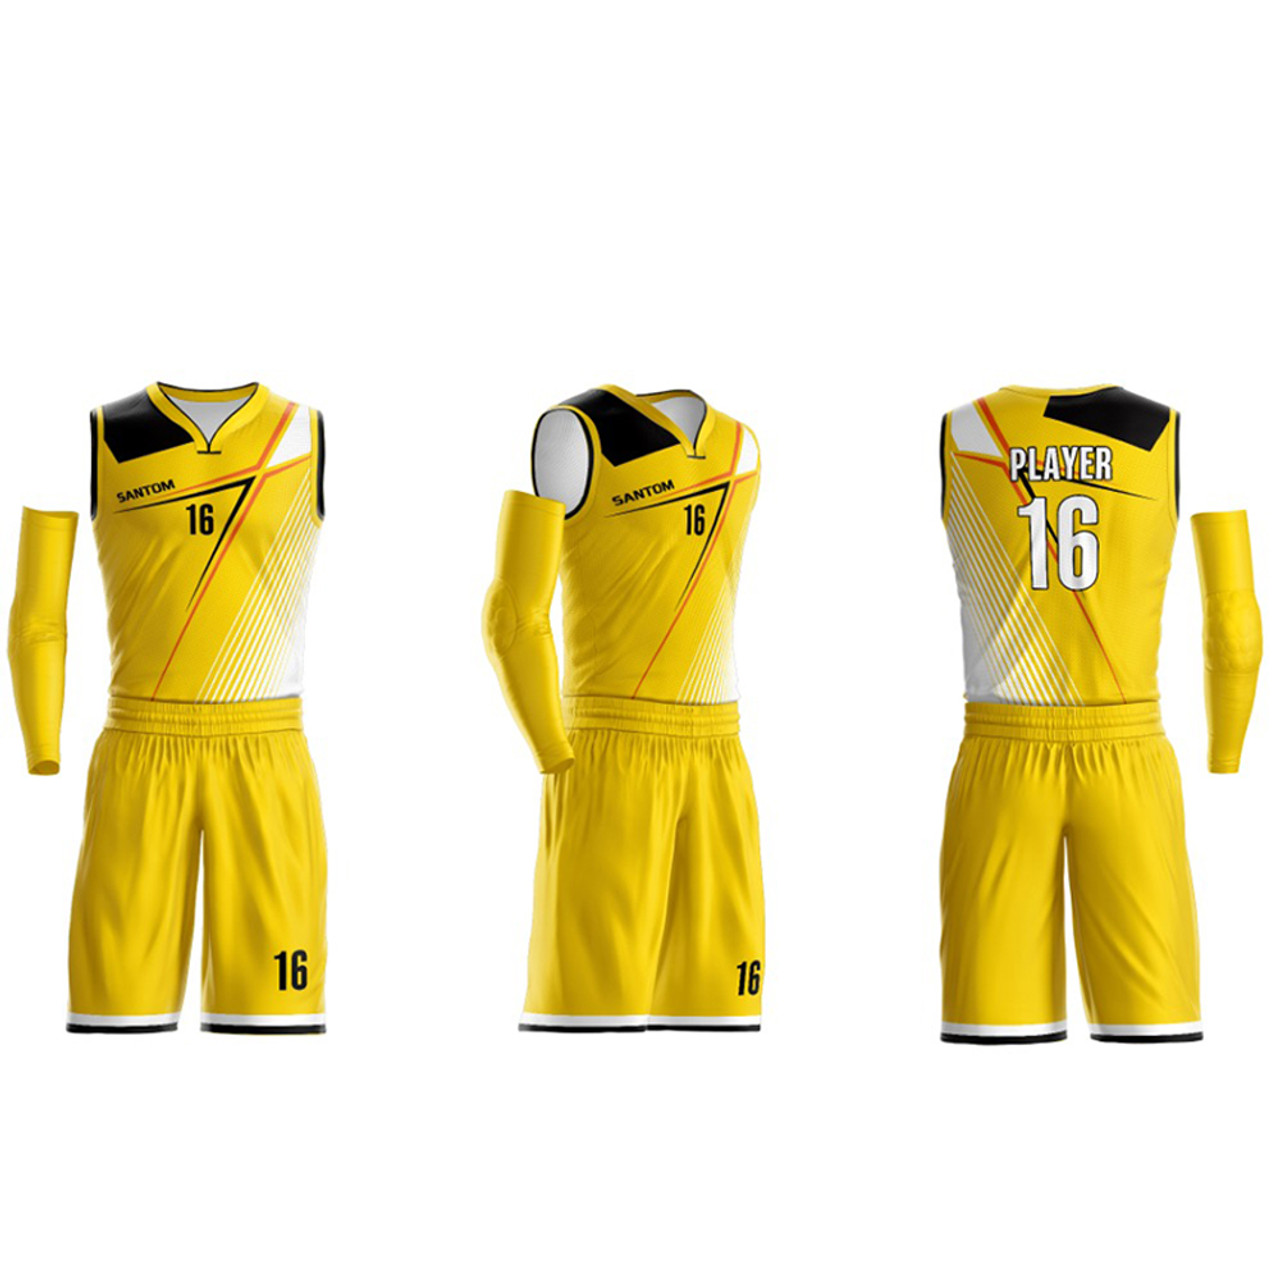 Custom Basketball Jerseys, Basketball Uniforms For Your Team – Tagged  Yellow